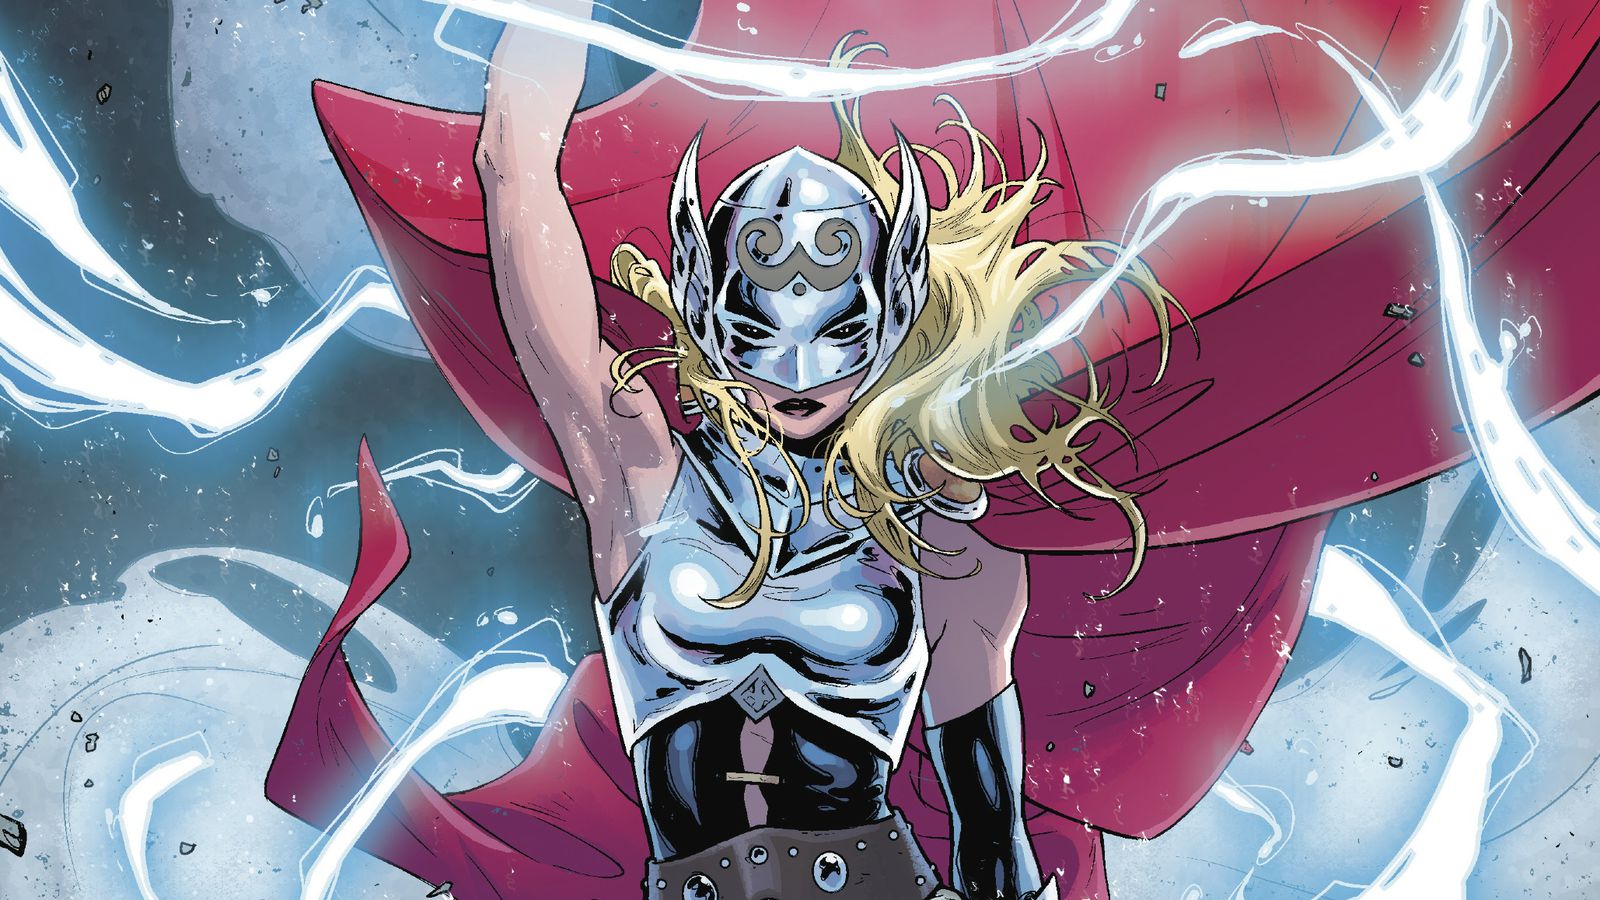 Natalie Portman is Female Thor in upcoming Thor: Love and Thunder